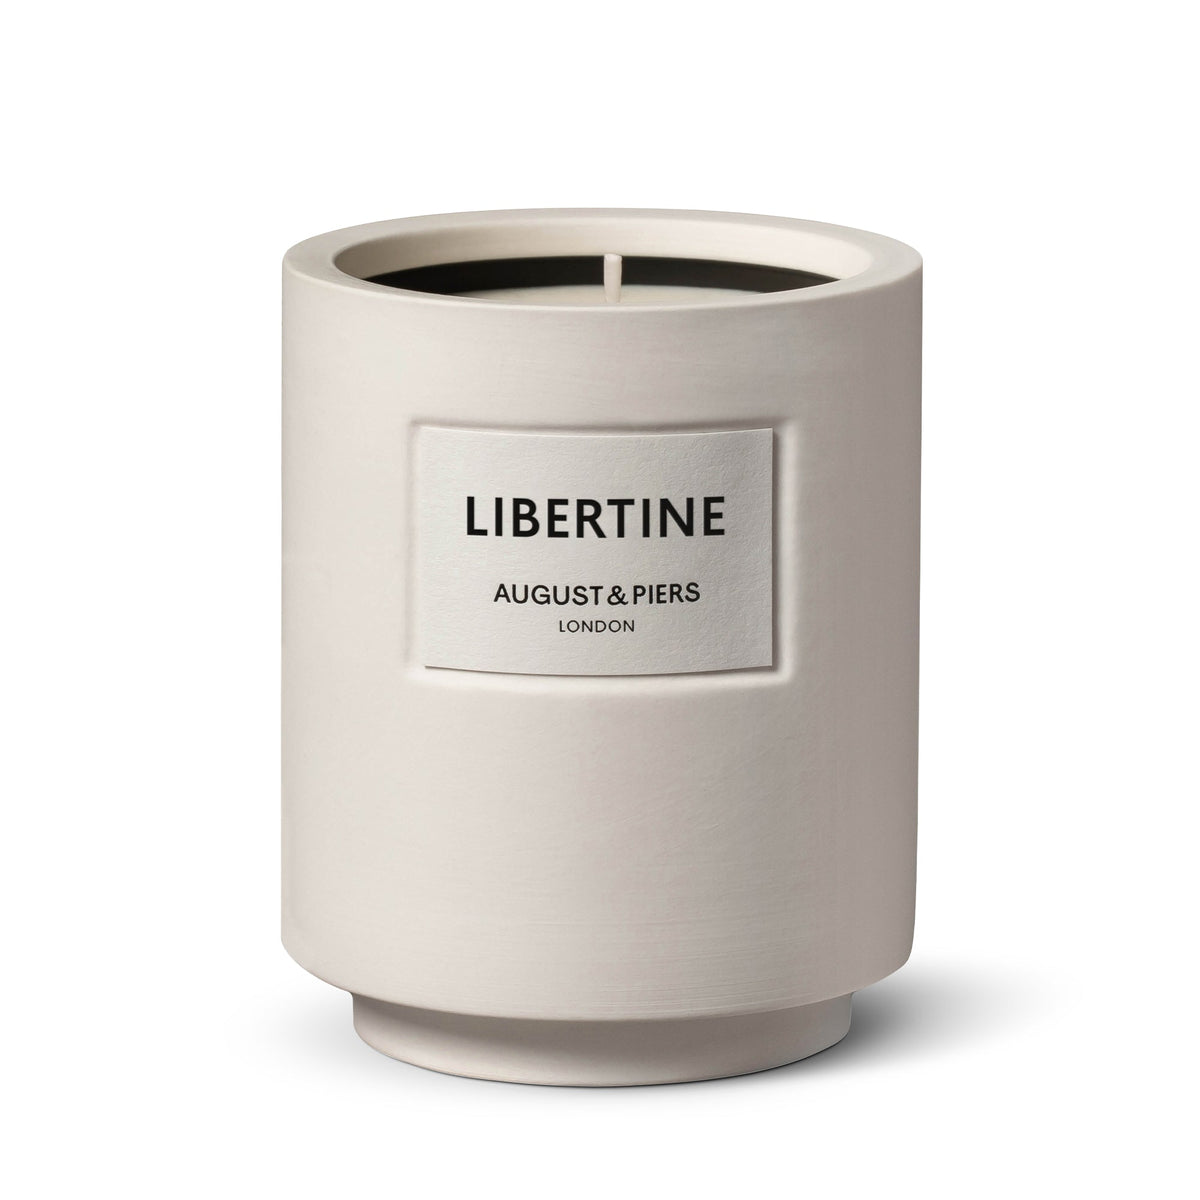 August & Piers Libertine Scented Candle